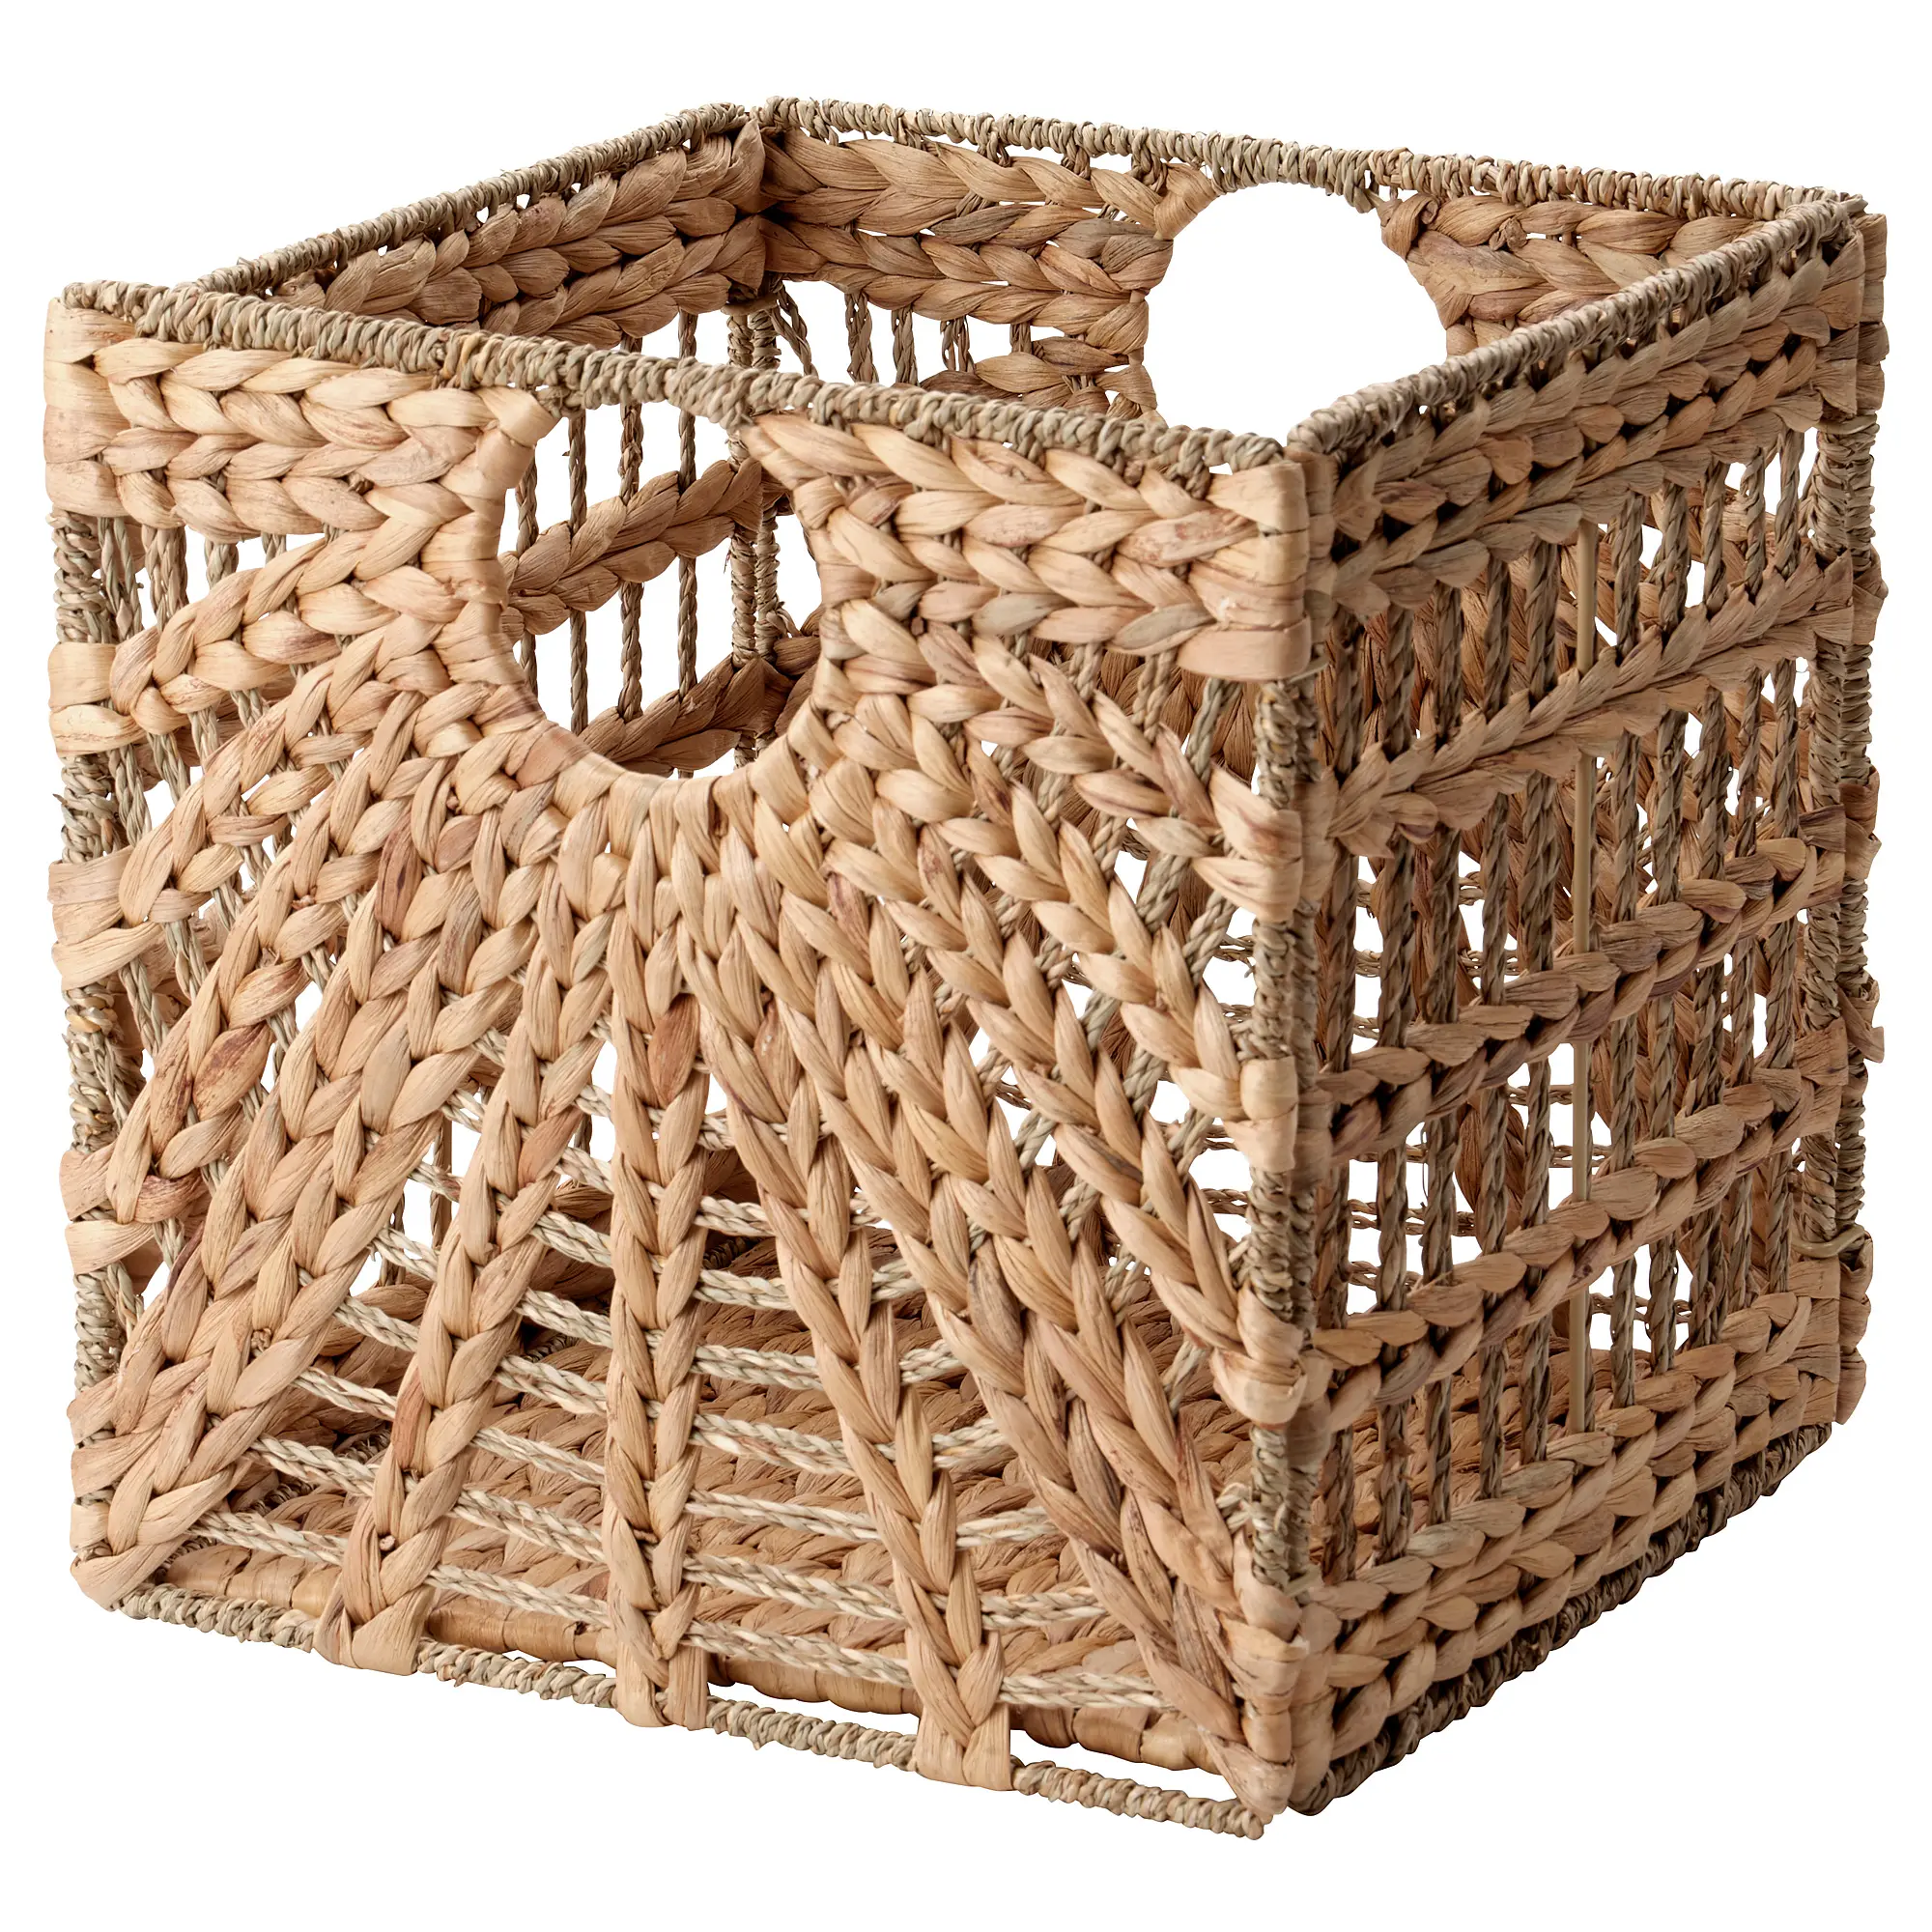 Wholesale Gorgeous Square Water Hyacinth Mix Seagrass Storage Basket Laundry Home Decor